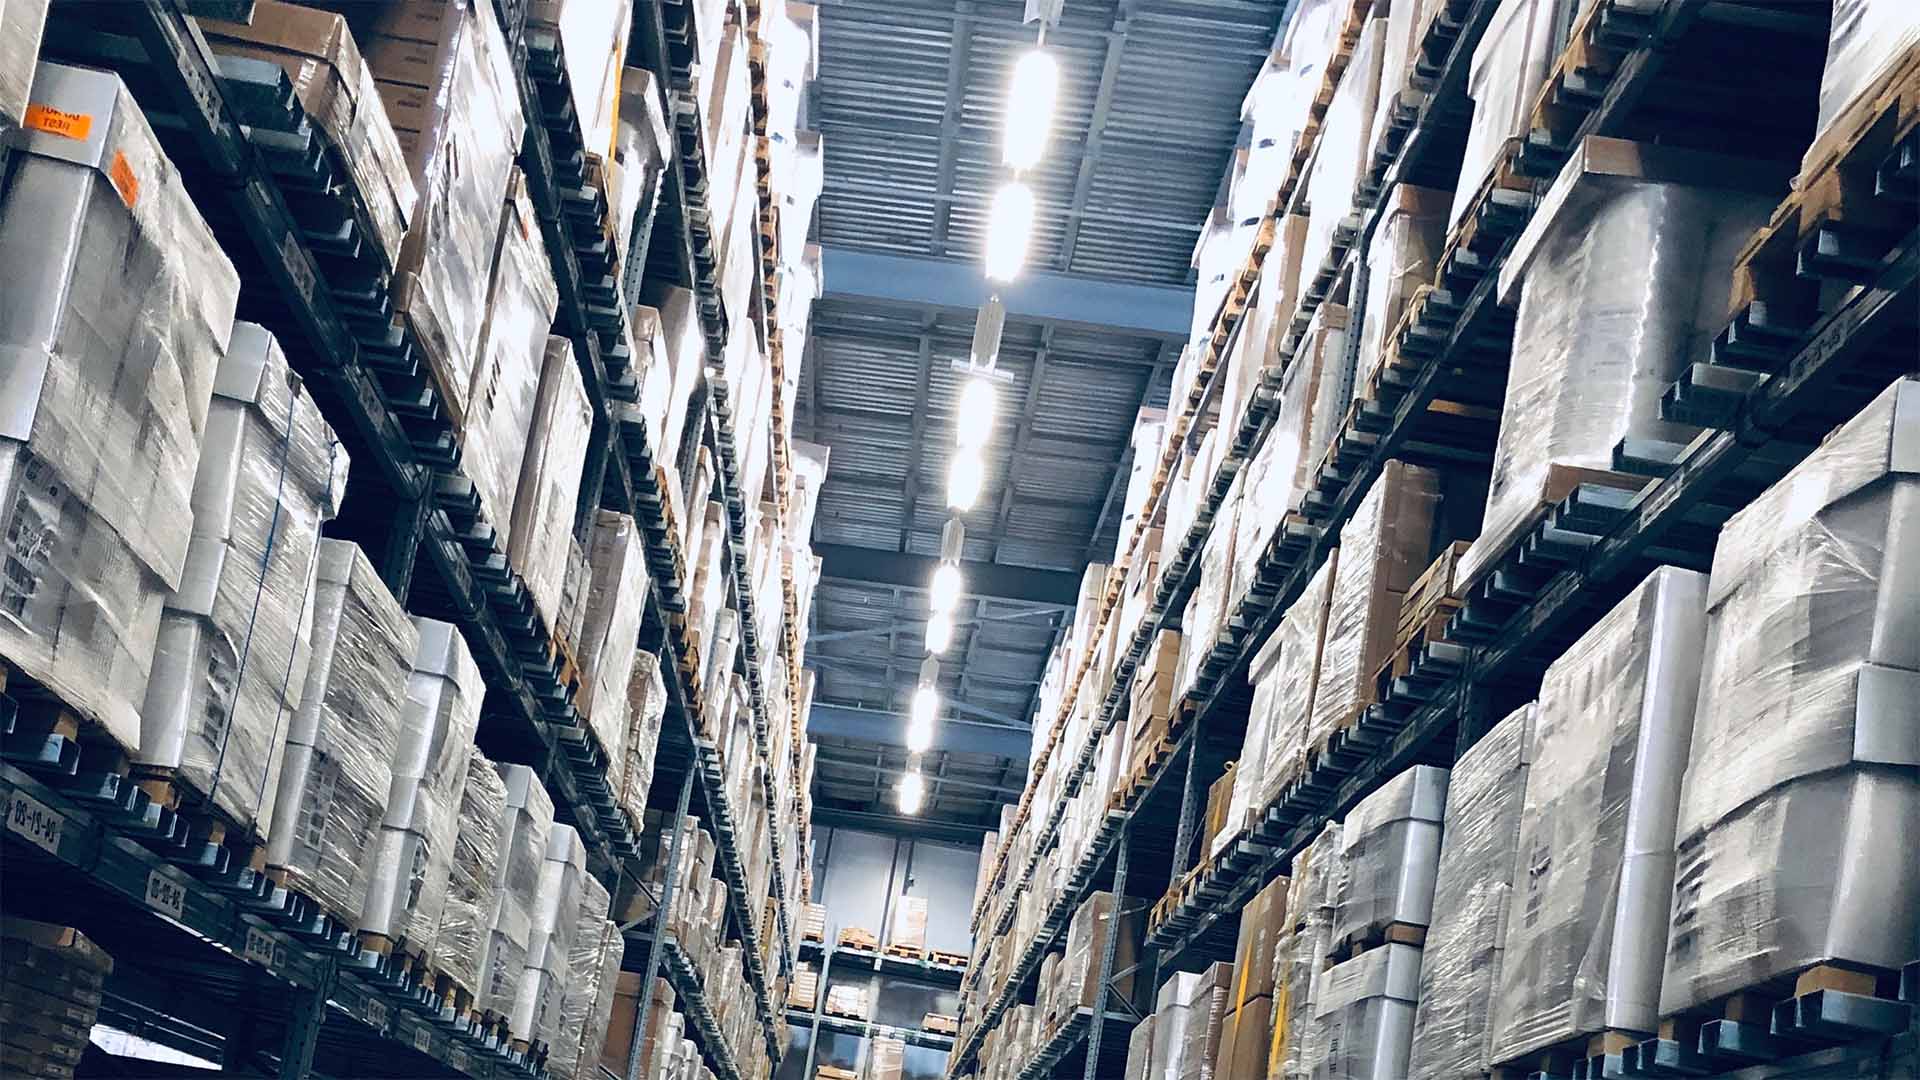 A tall warehouse loaded with pallets from floor to ceiling.